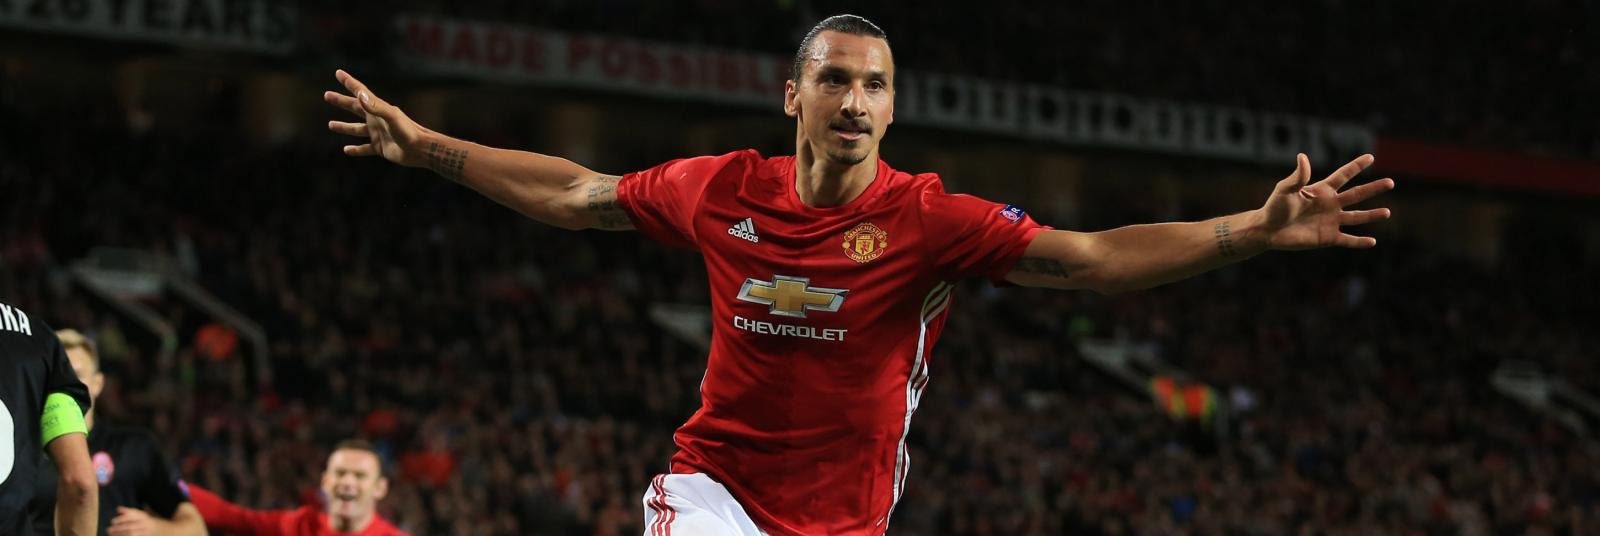 Legend’s Manchester United XI – Out: Ibrahimovic & Rooney – In: Mkhitaryan